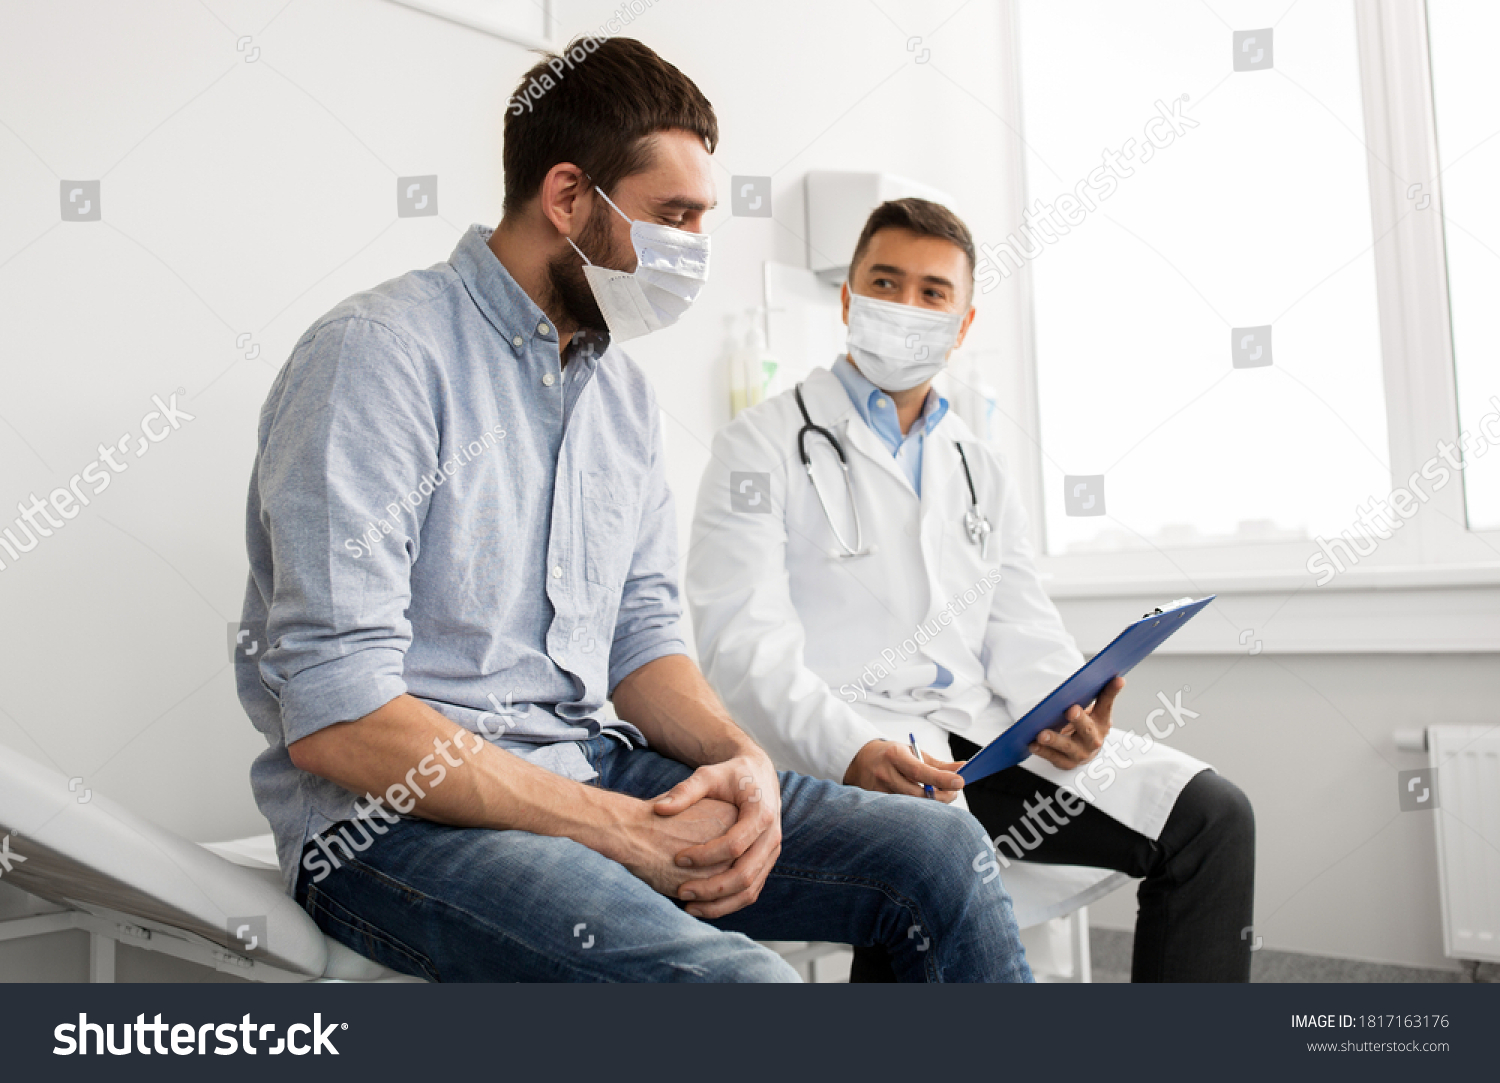 medicine, healthcare and pandemic concept - male doctor wearing face protective medical mask for protection from virus disease with clipboard and young man patient meeting at hospital #1817163176